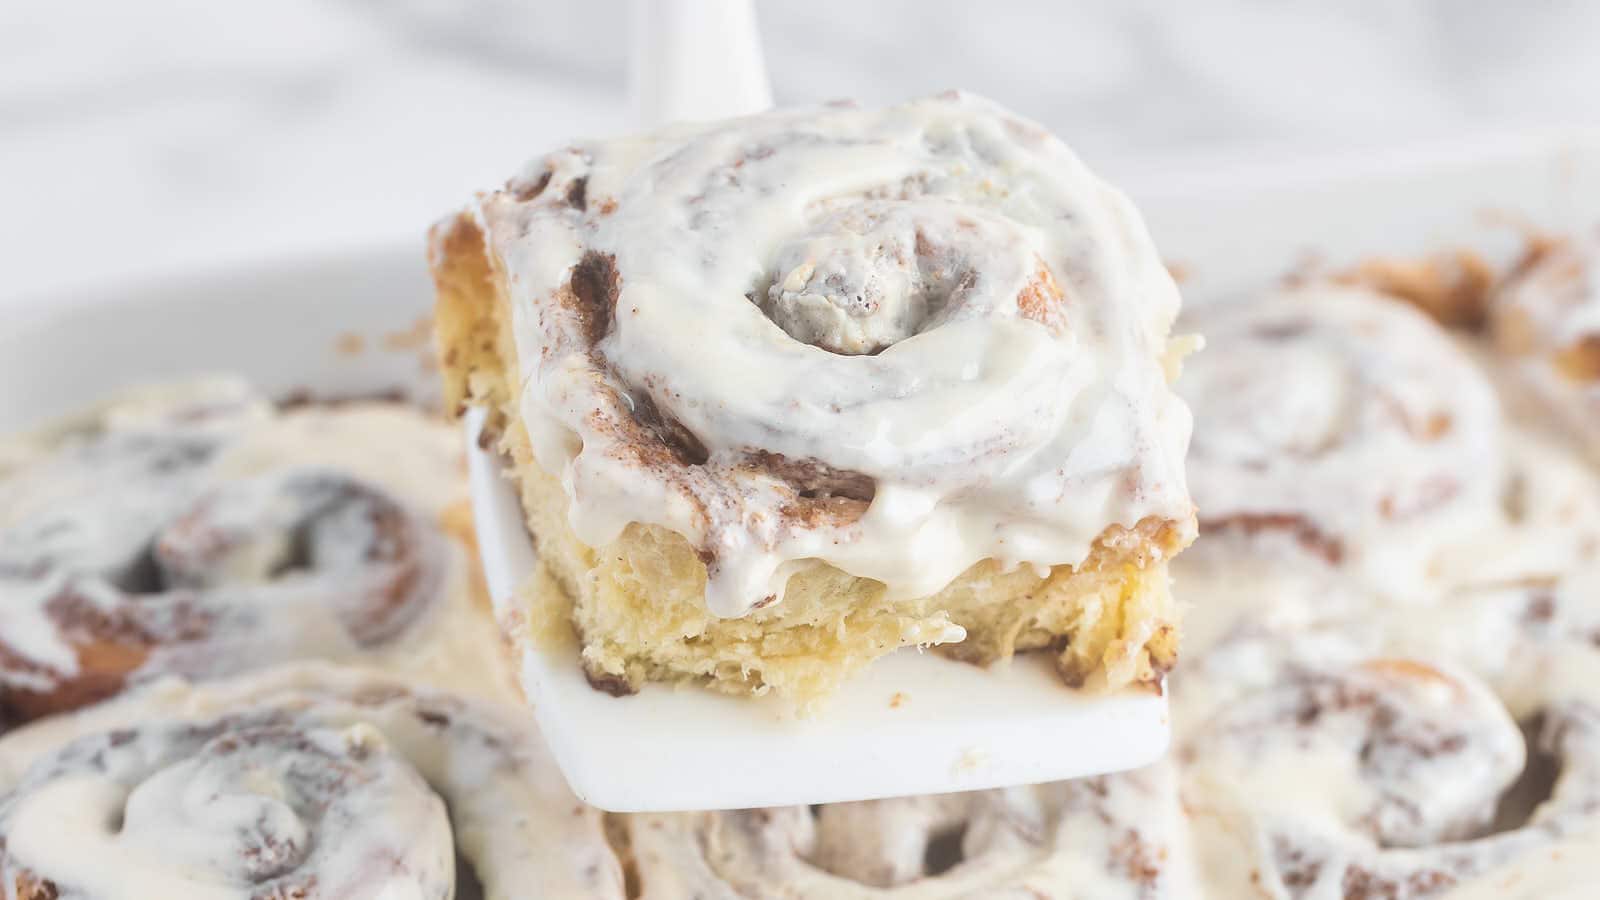 Cinnamon Roll recipe by Cheerful Cook.